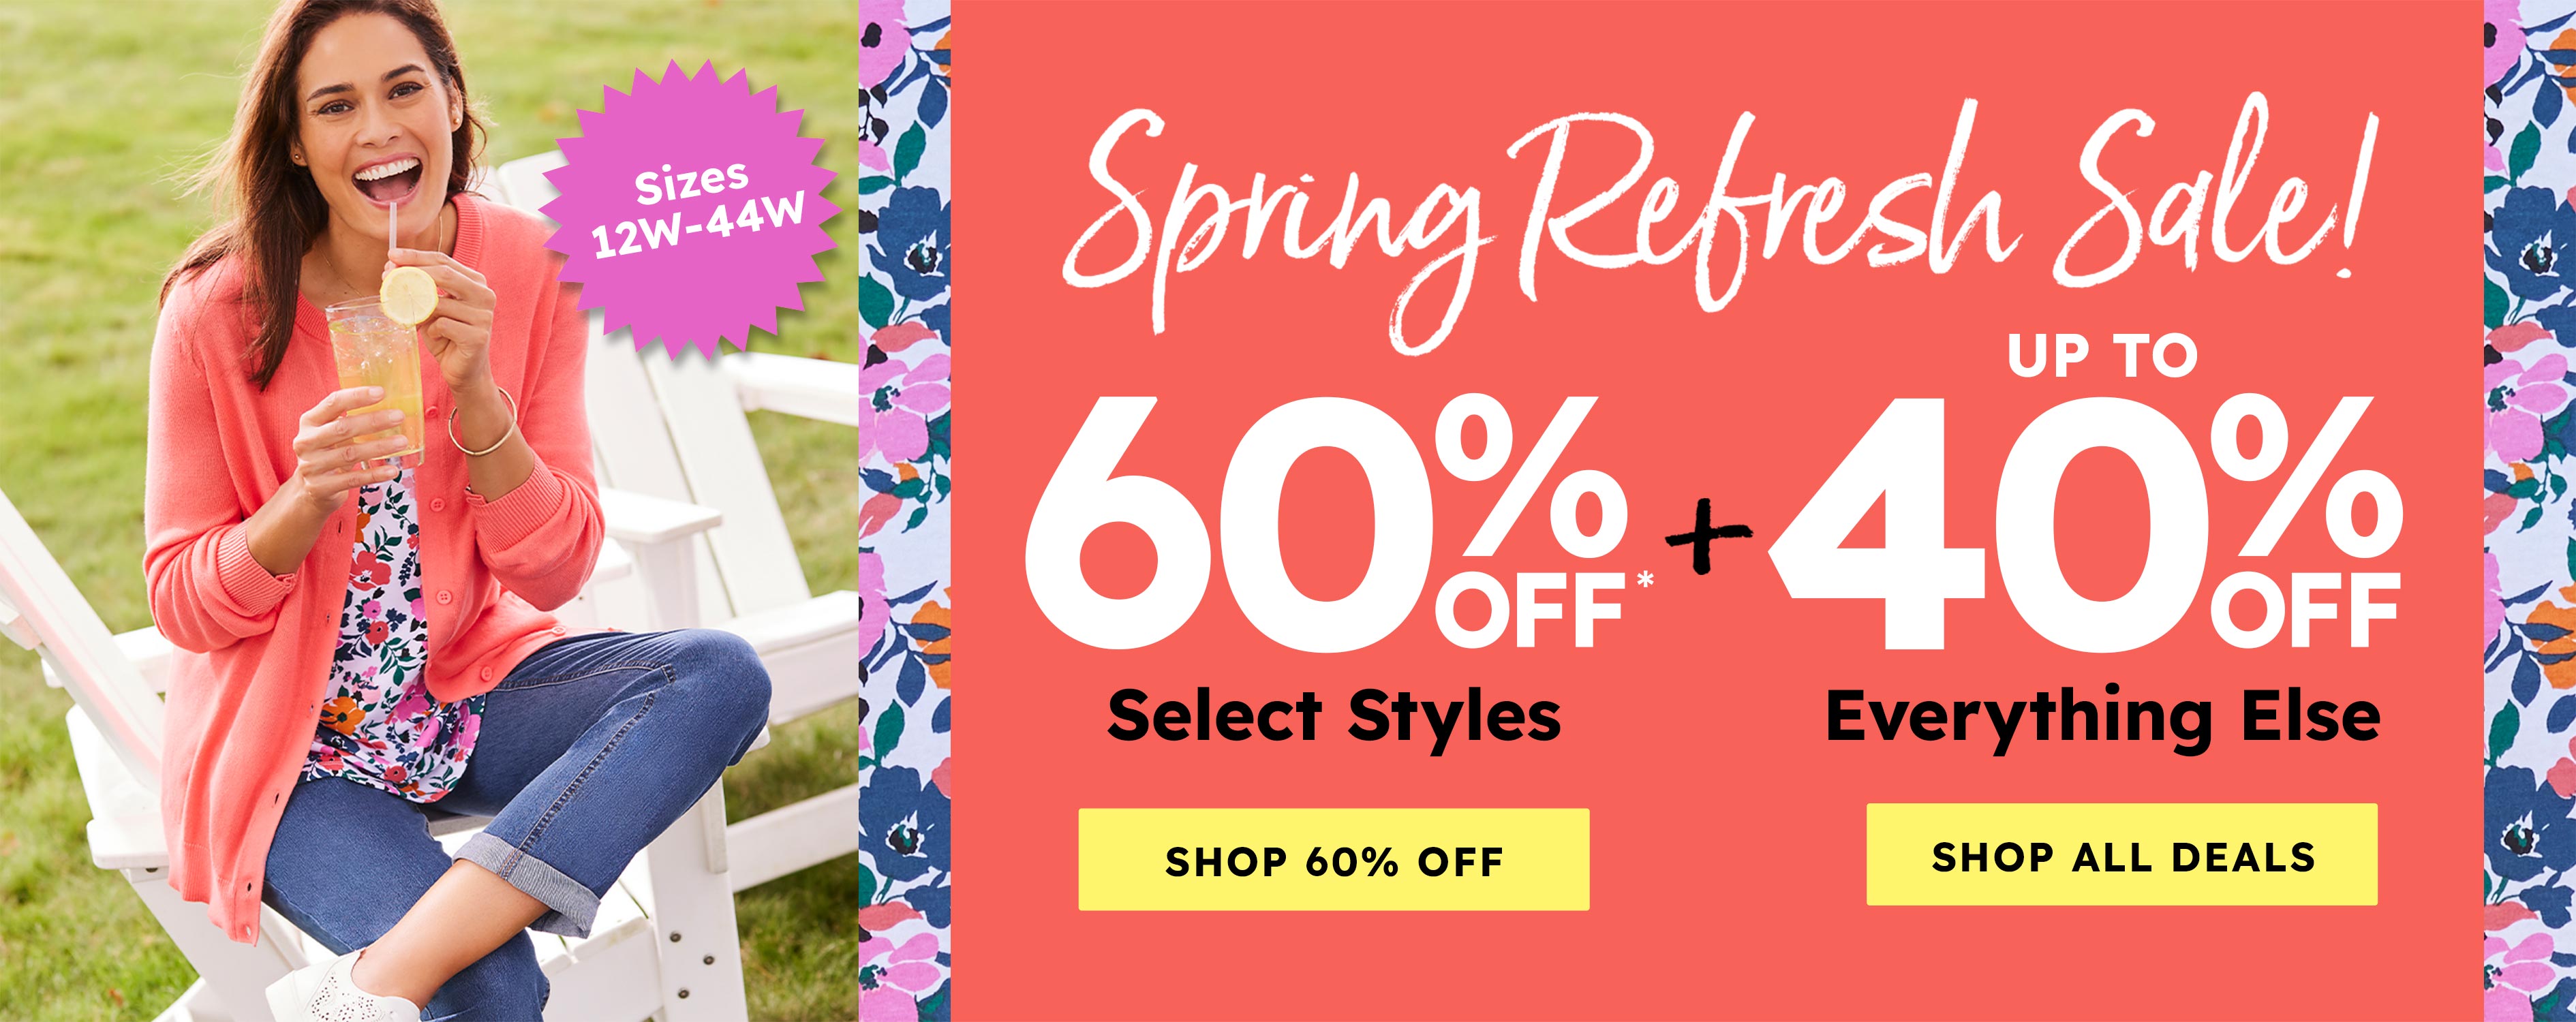 Spring Refresh Sale! 60% off select styles + up to 40% off everything else shop all deals